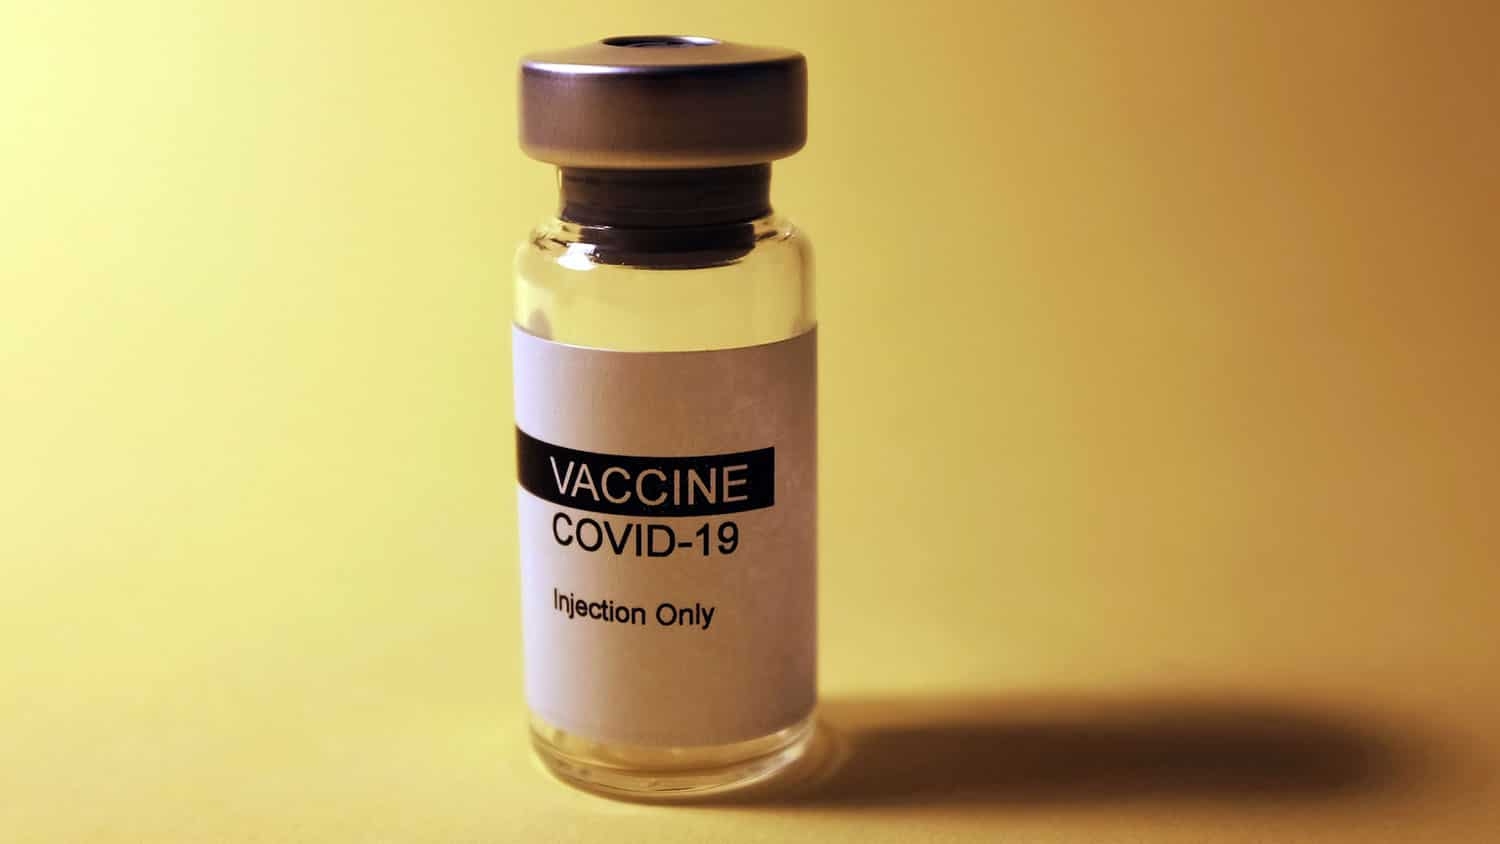 a vial labelled "COVID-19 Vaccine" sits on a table against a yellow backdrop